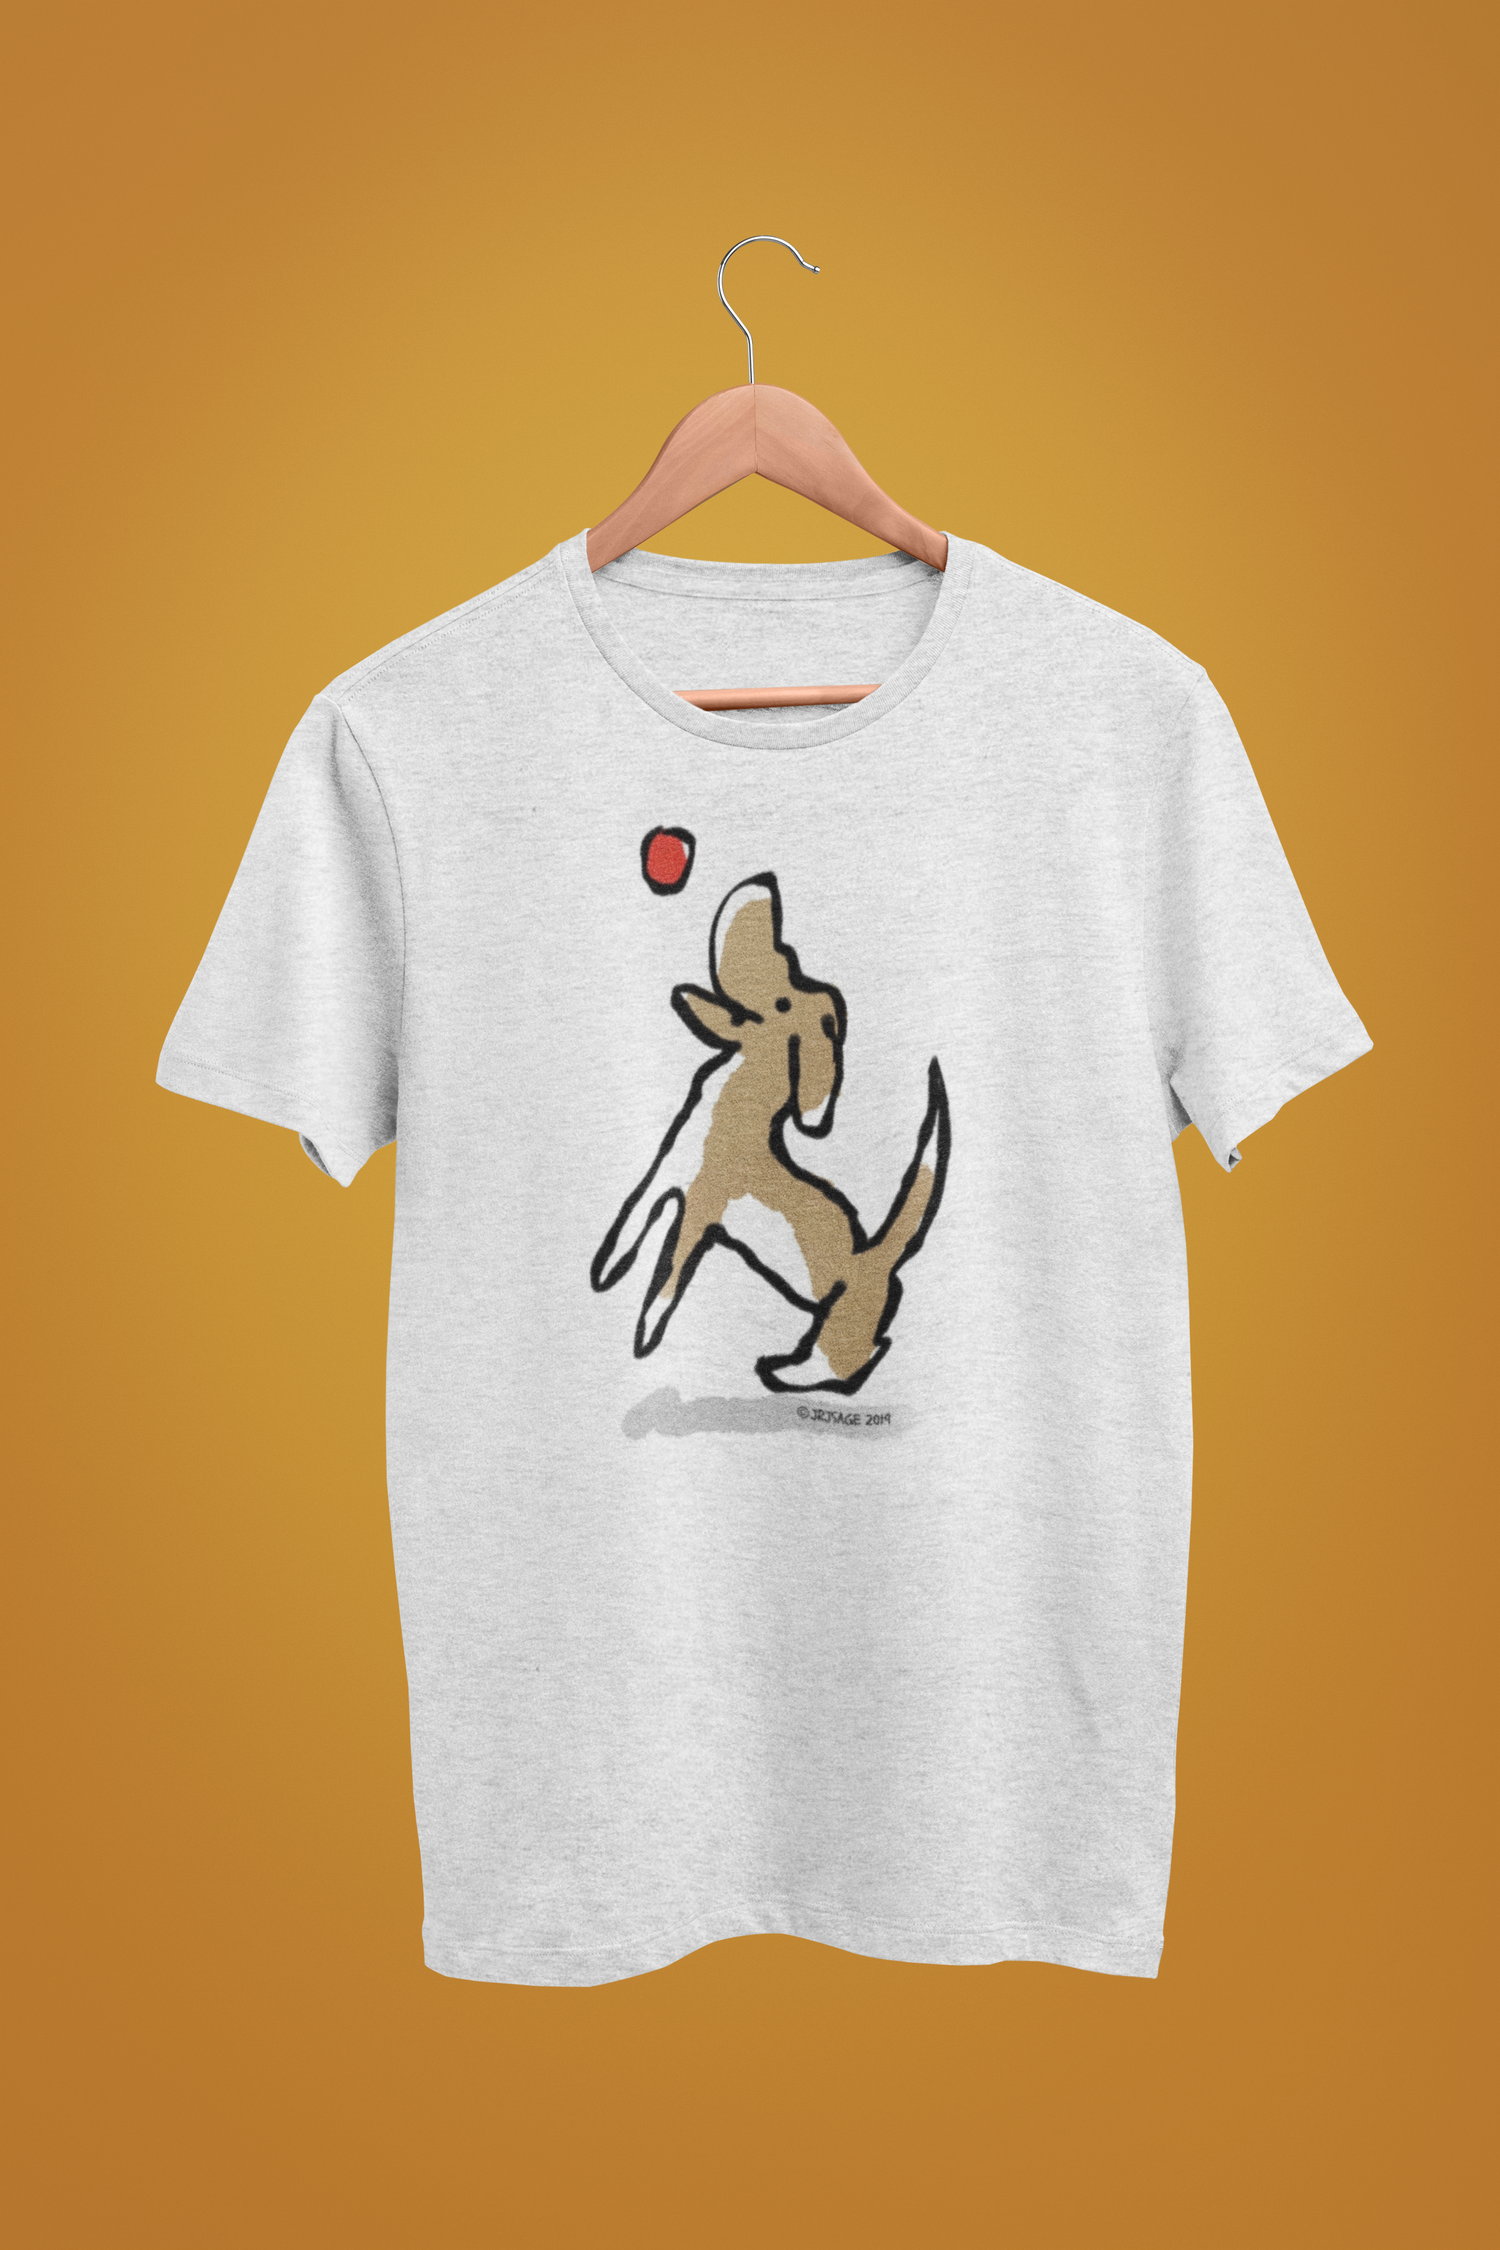 Dog T-shirt - Illustrated Jumping Dog T-shirts on cream heather grey vegan cotton by Hector and Bone